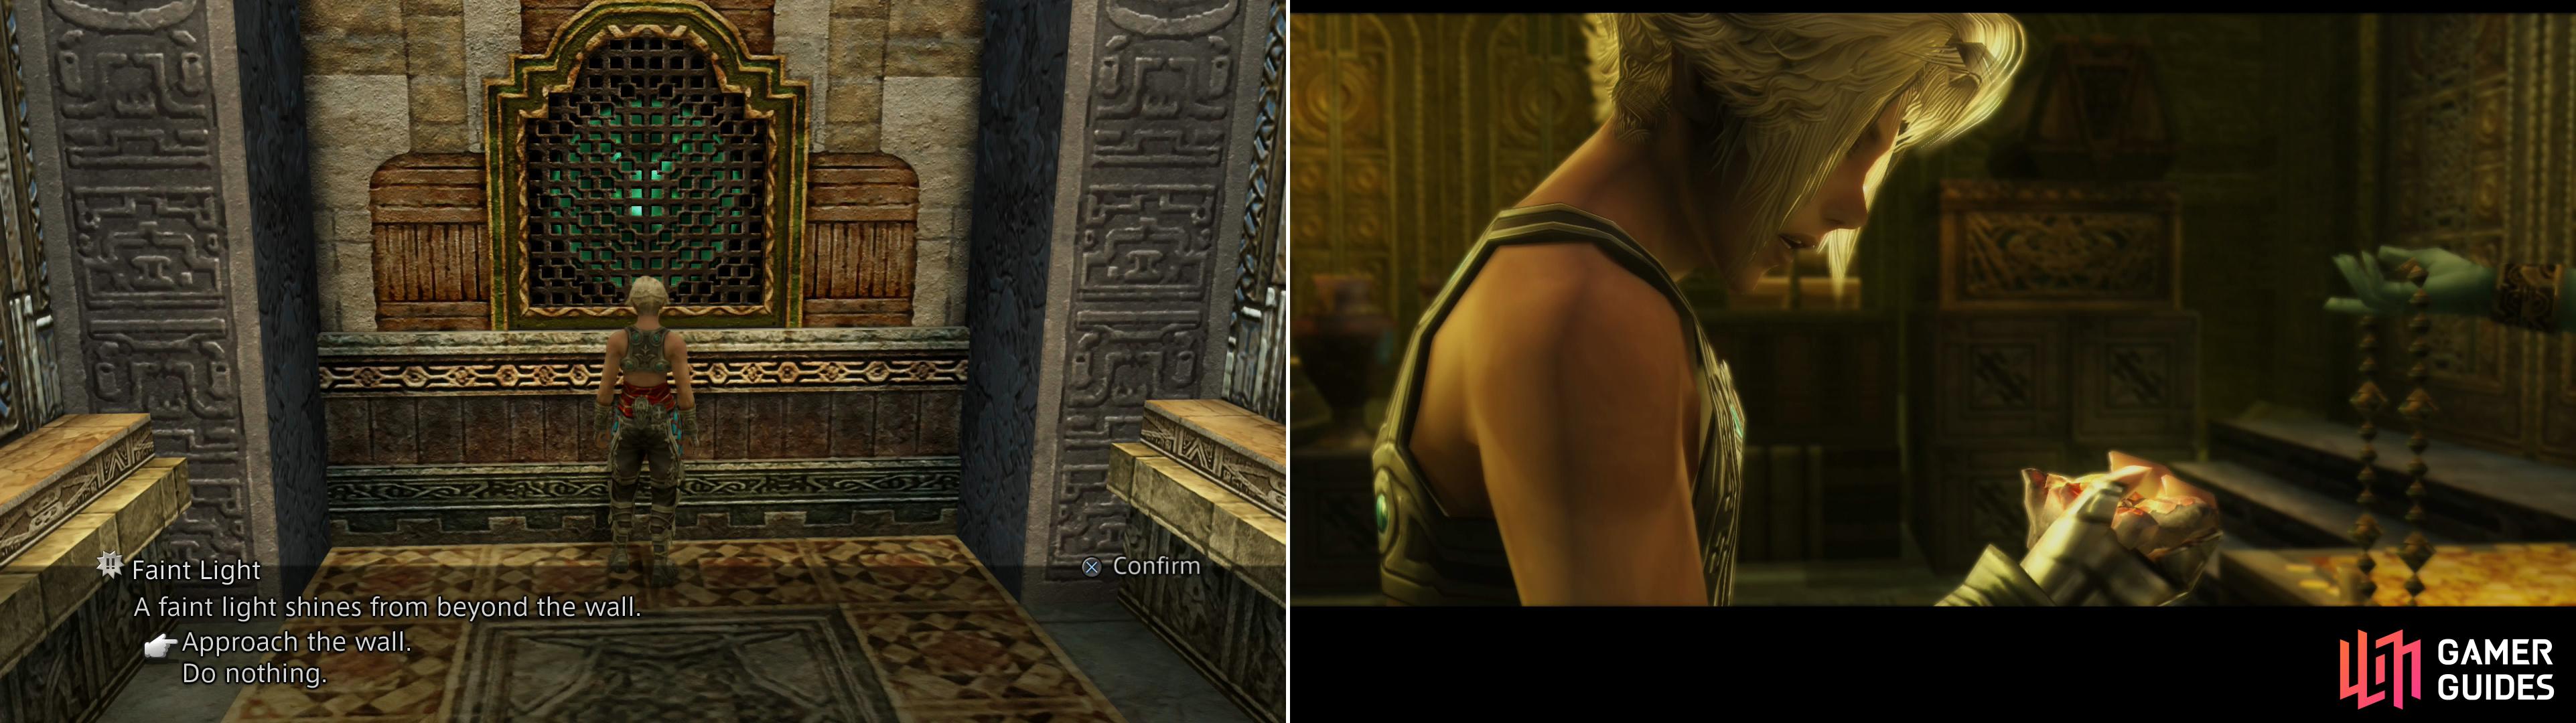 Find the hidden door by searching for the wall with the glowing light (left), after which Vaan will claim a choice bauble from the treasury (right).